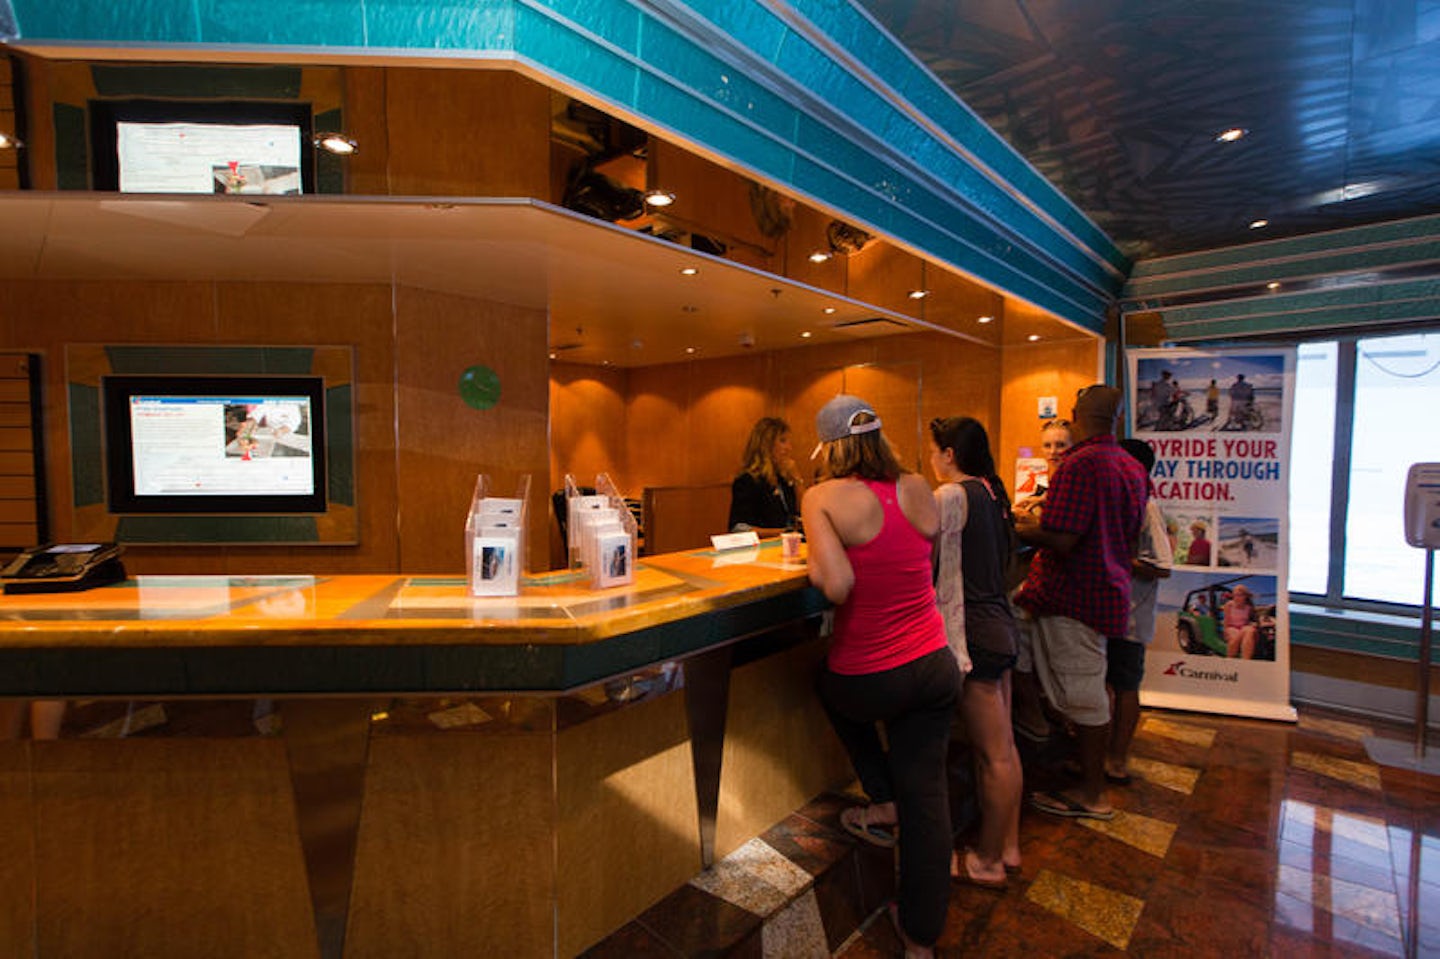 Guest Services on Carnival Magic